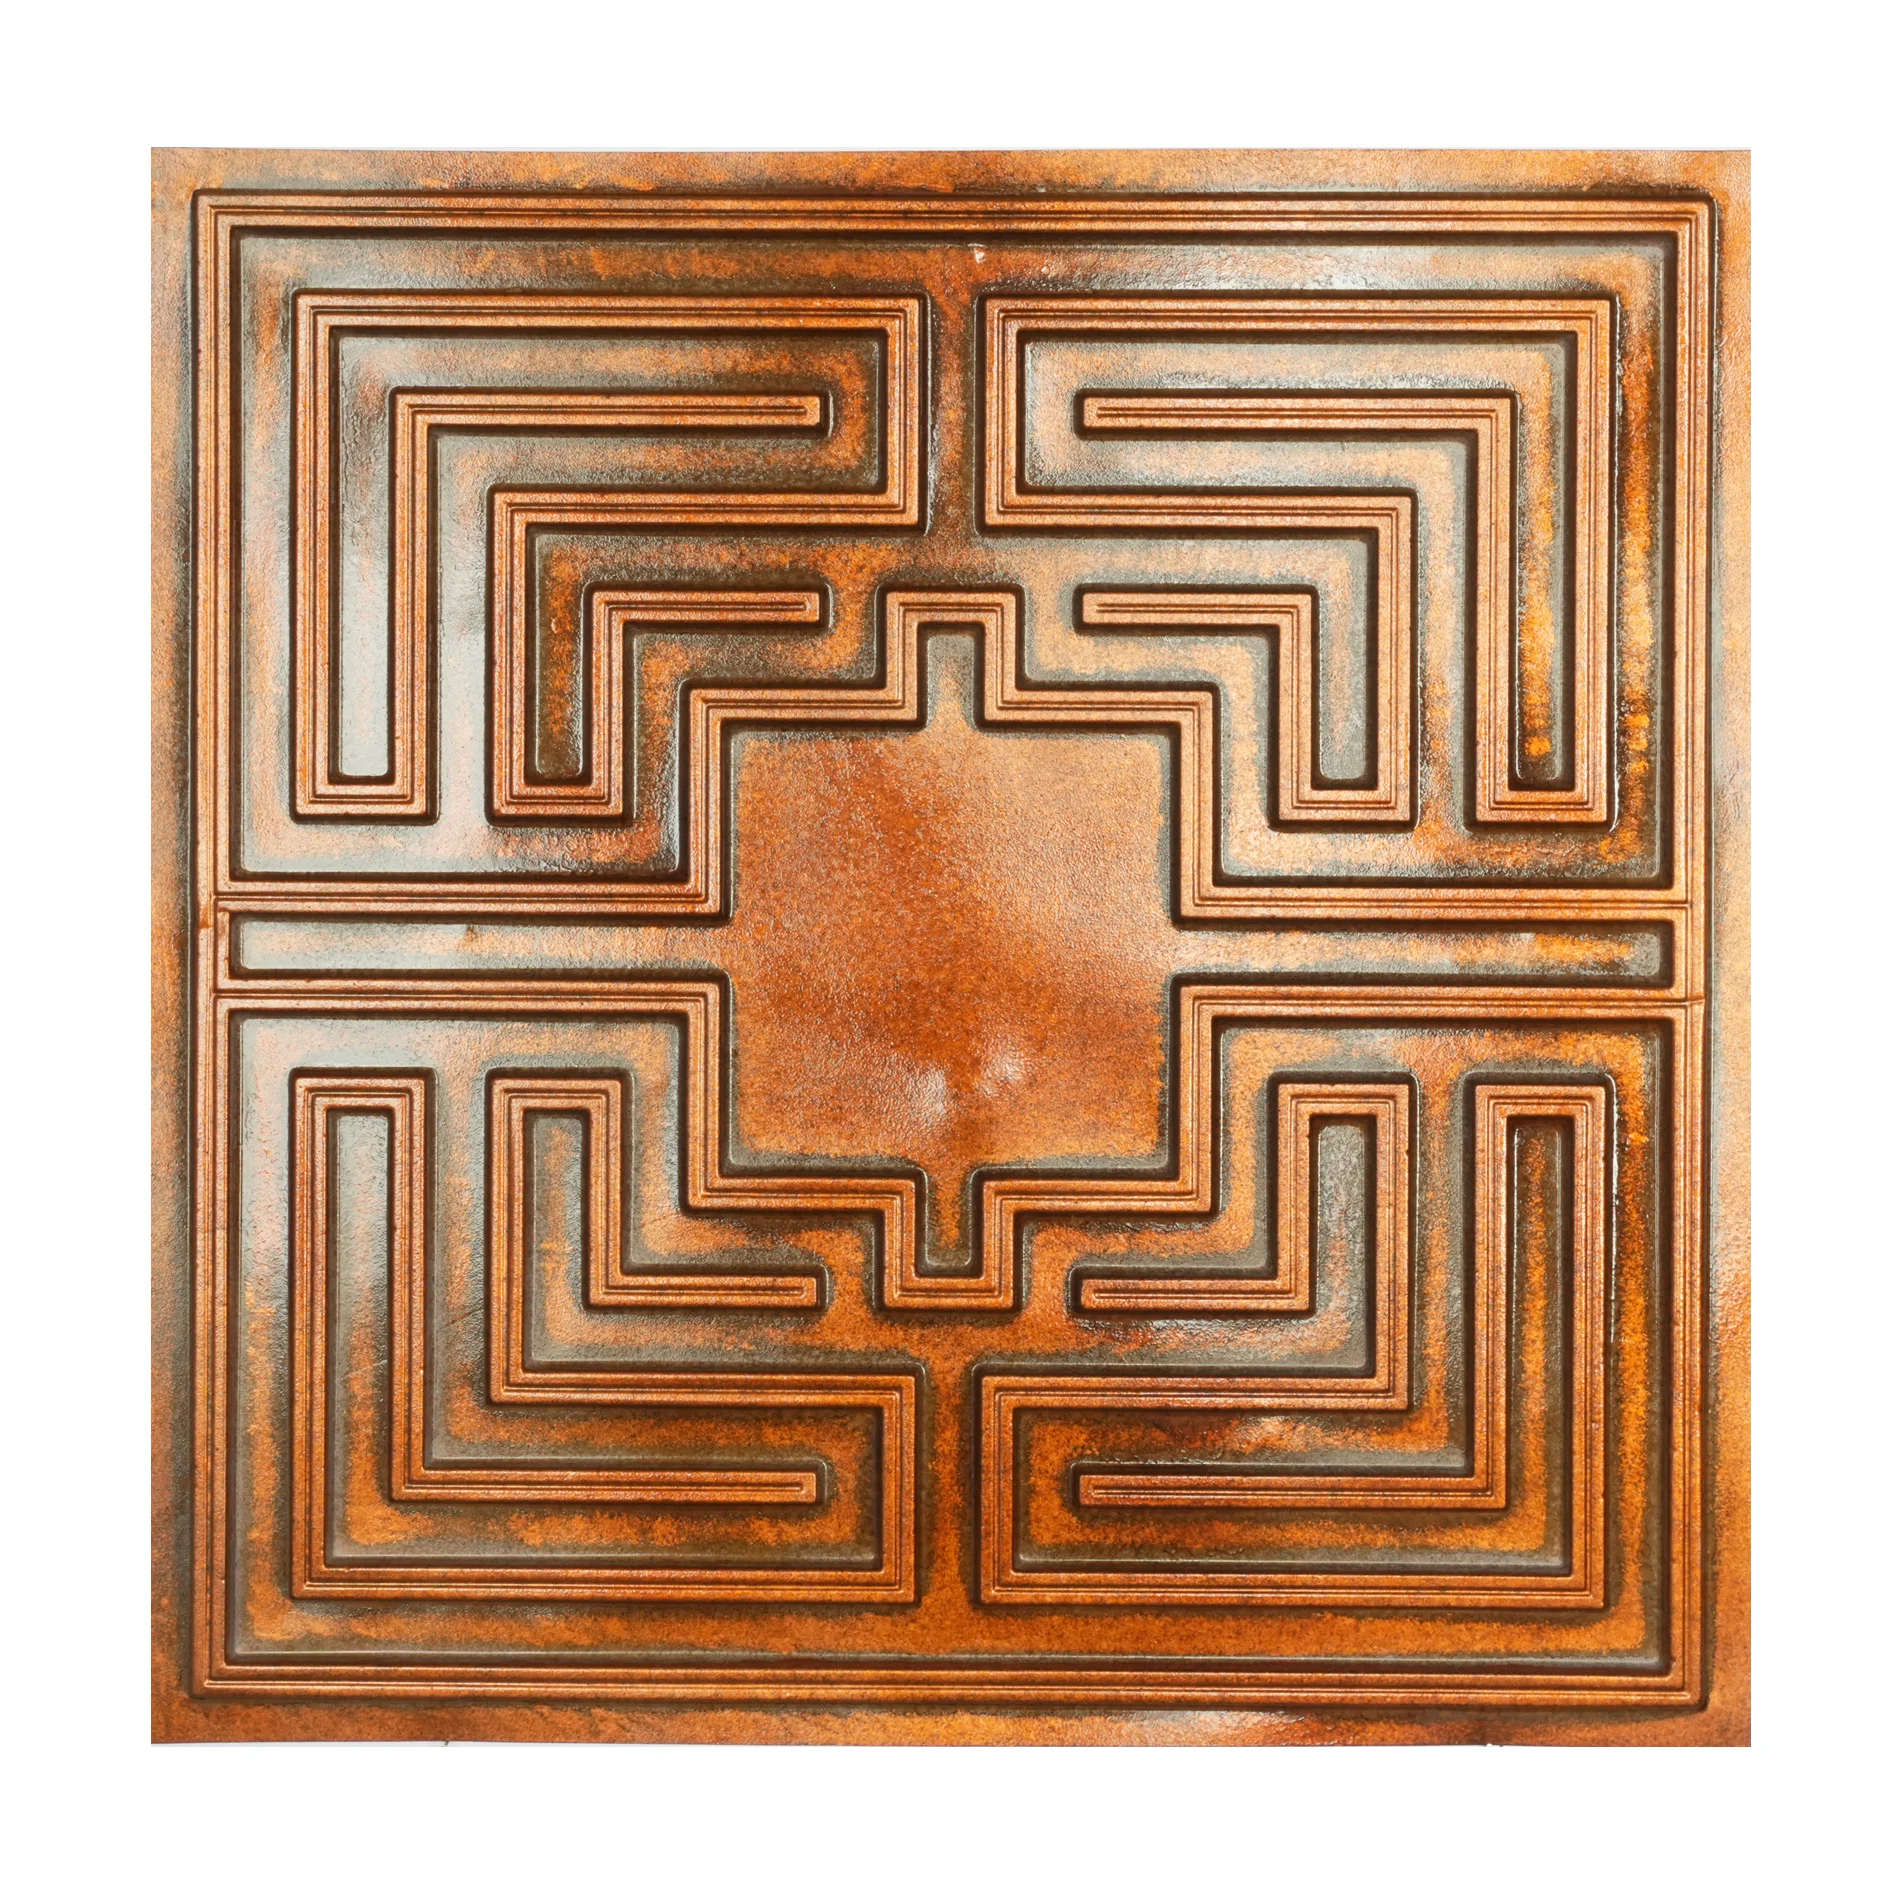 Faux tin ceiling tiles Art style 3D embossing wall panels PL25 archaic copper